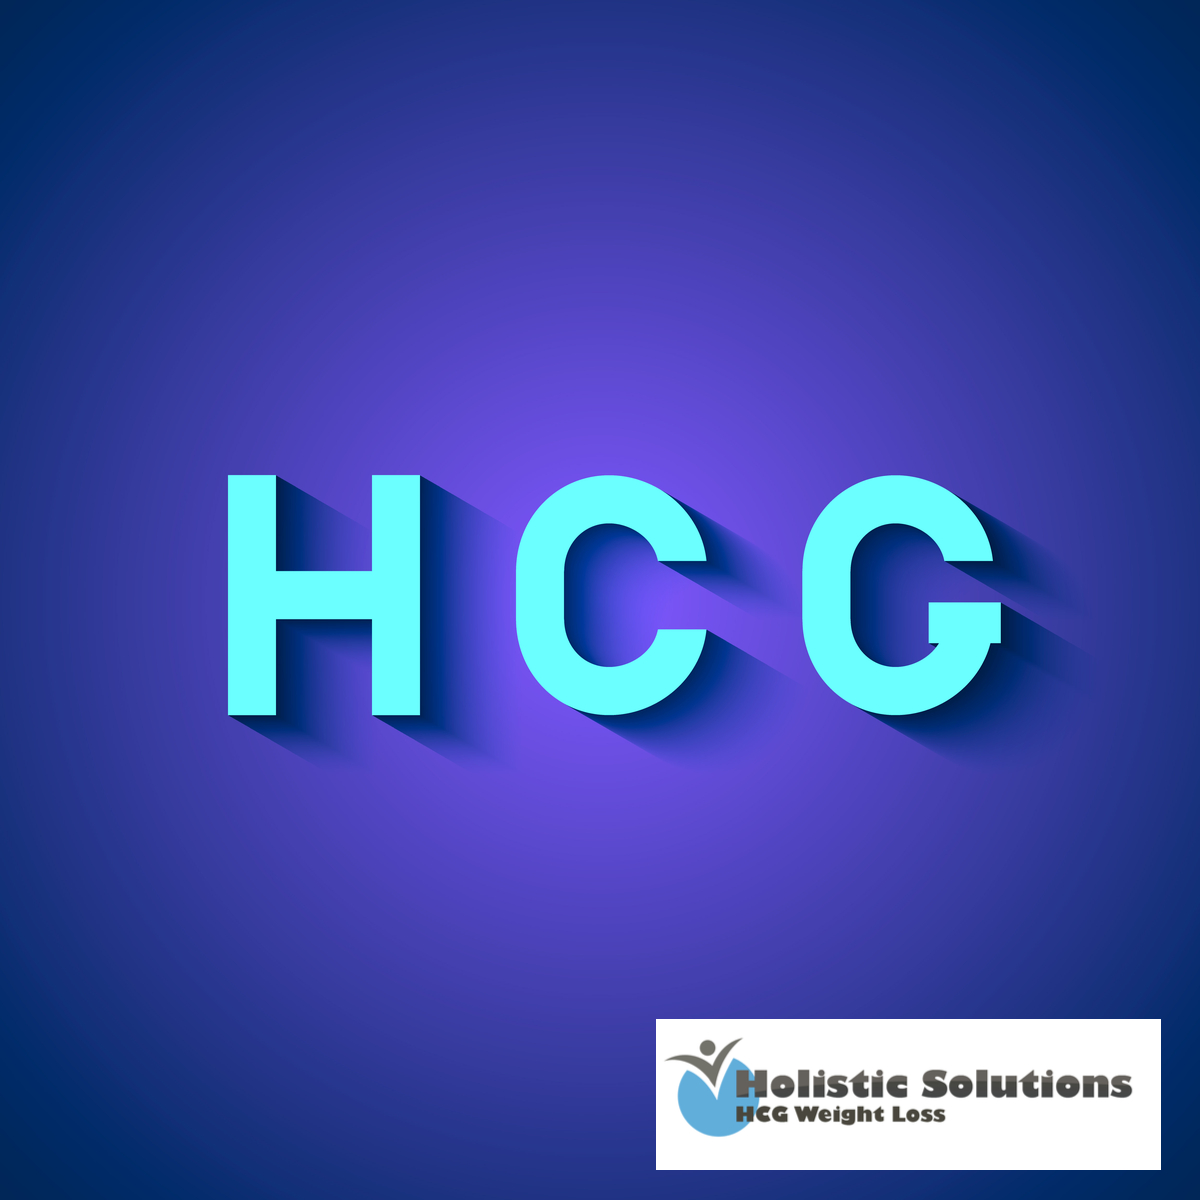 What Would Easy HCG Weight Loss Mean To You?